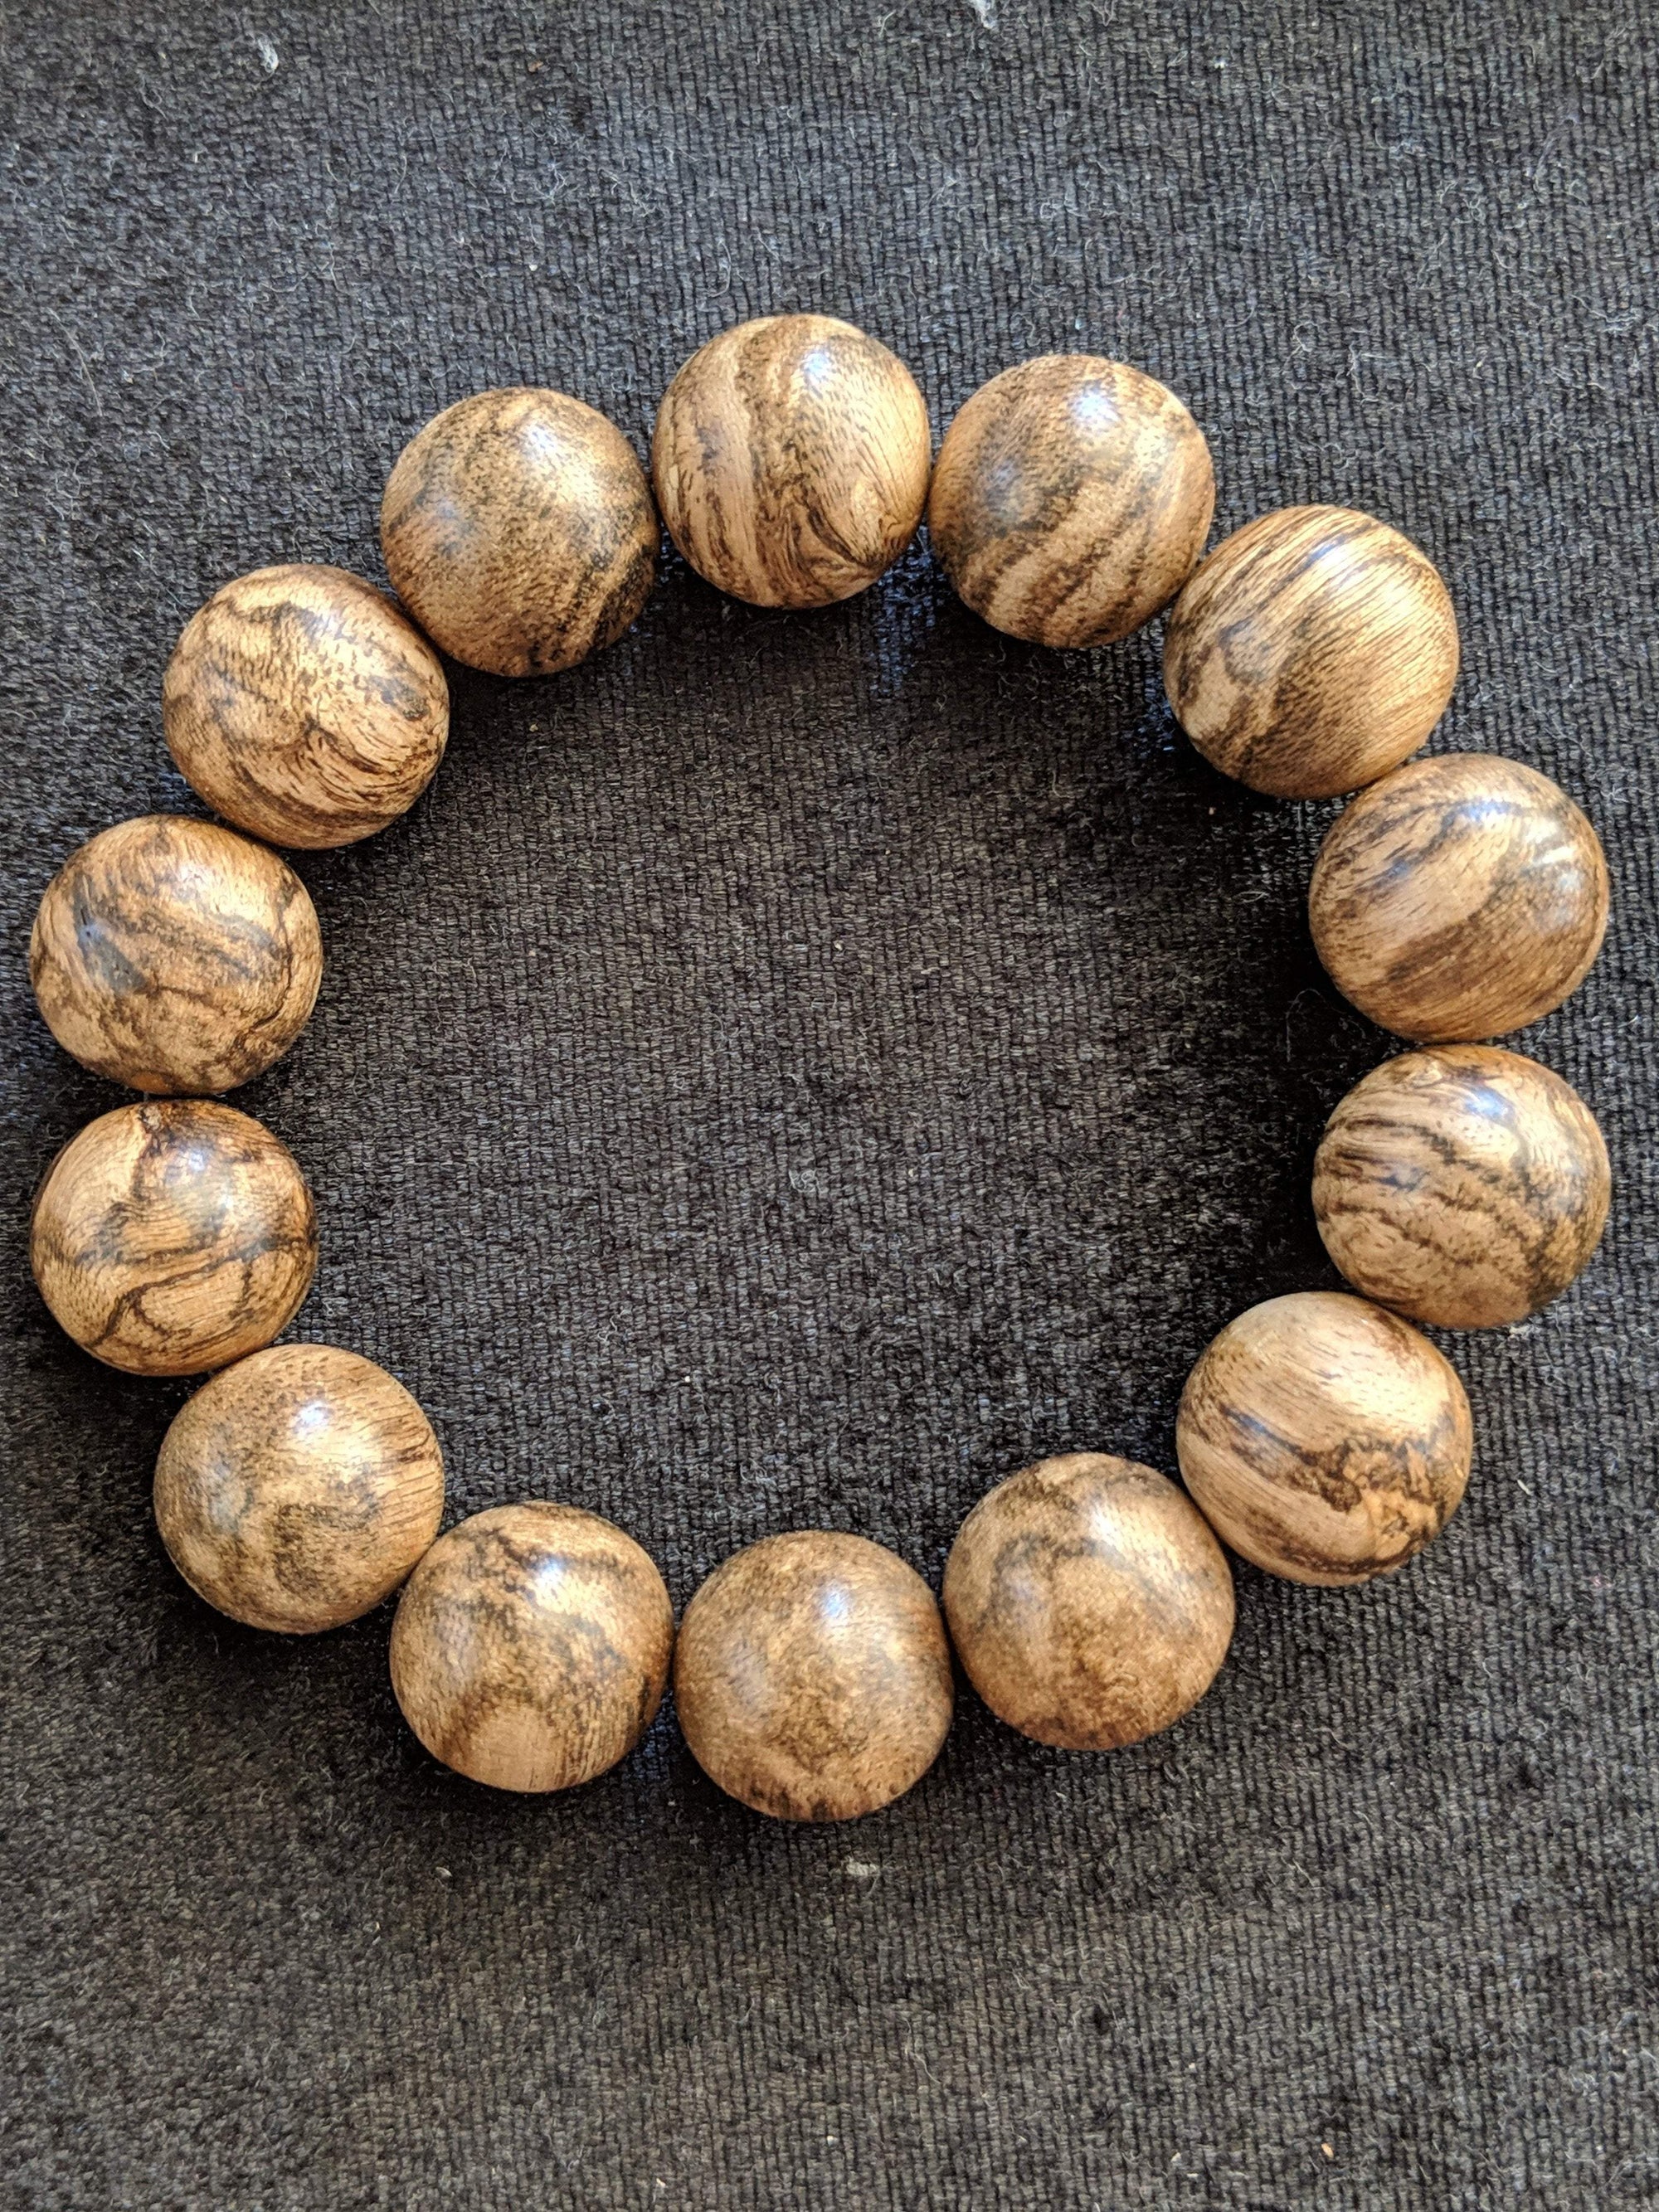 *SOLD* The Marble Trilogy - Wild Borneo Agarwood Bracelet - Number 2, and Number 3 -